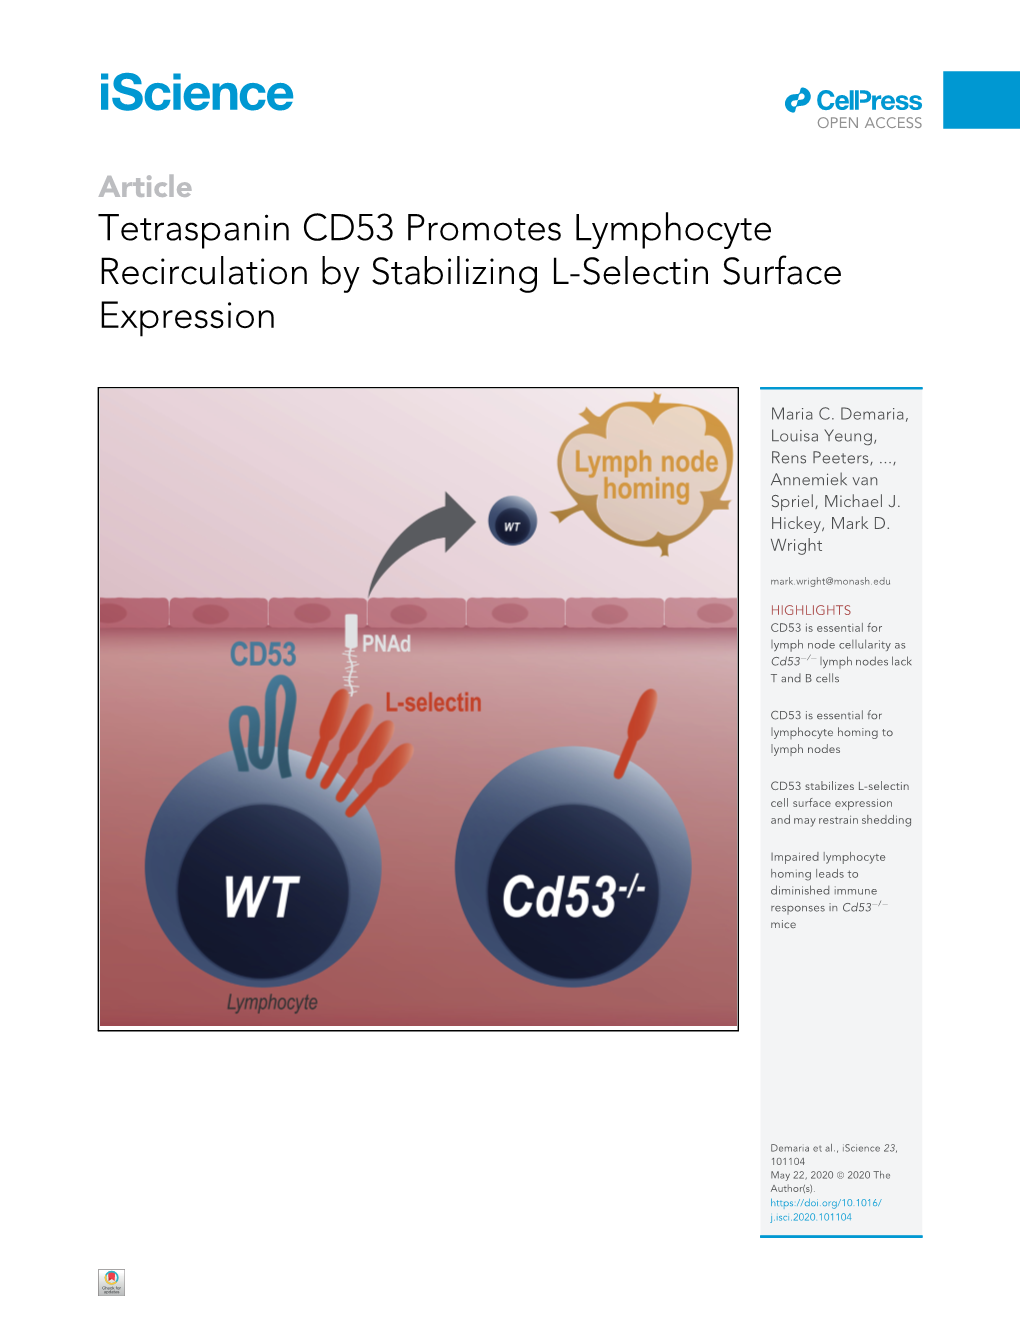 Tetraspanin CD53 Promotes Lymphocyte Recirculation by Stabilizing L-Selectin Surface Expression